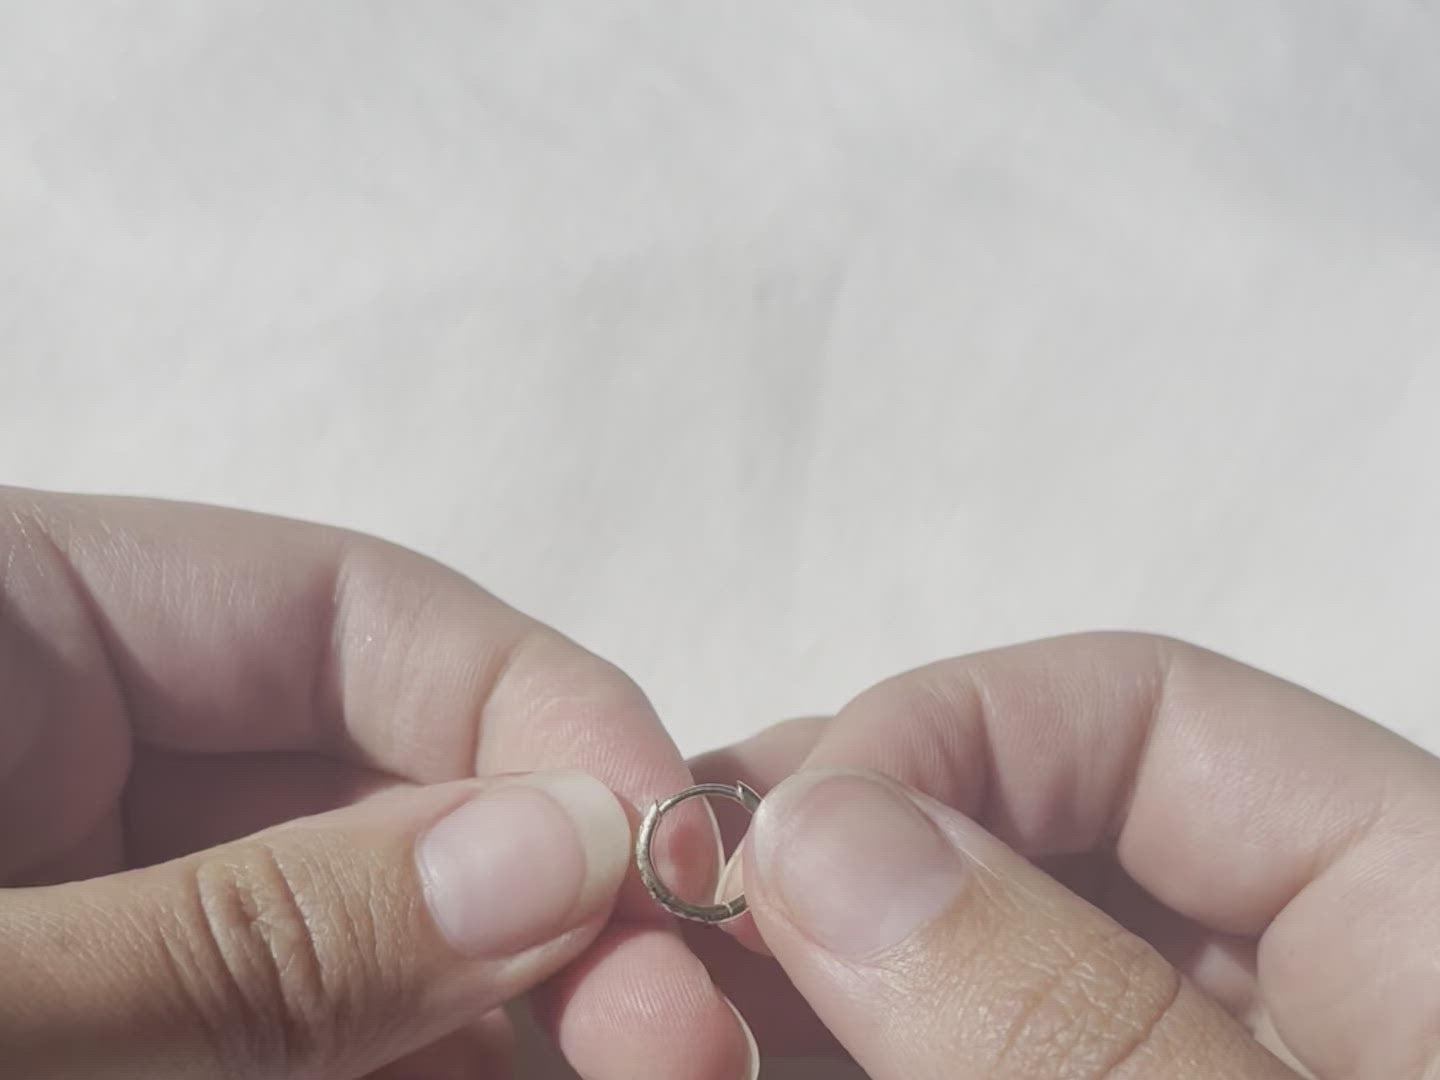 A video demonstrating how the hinge works on the huggie hoops